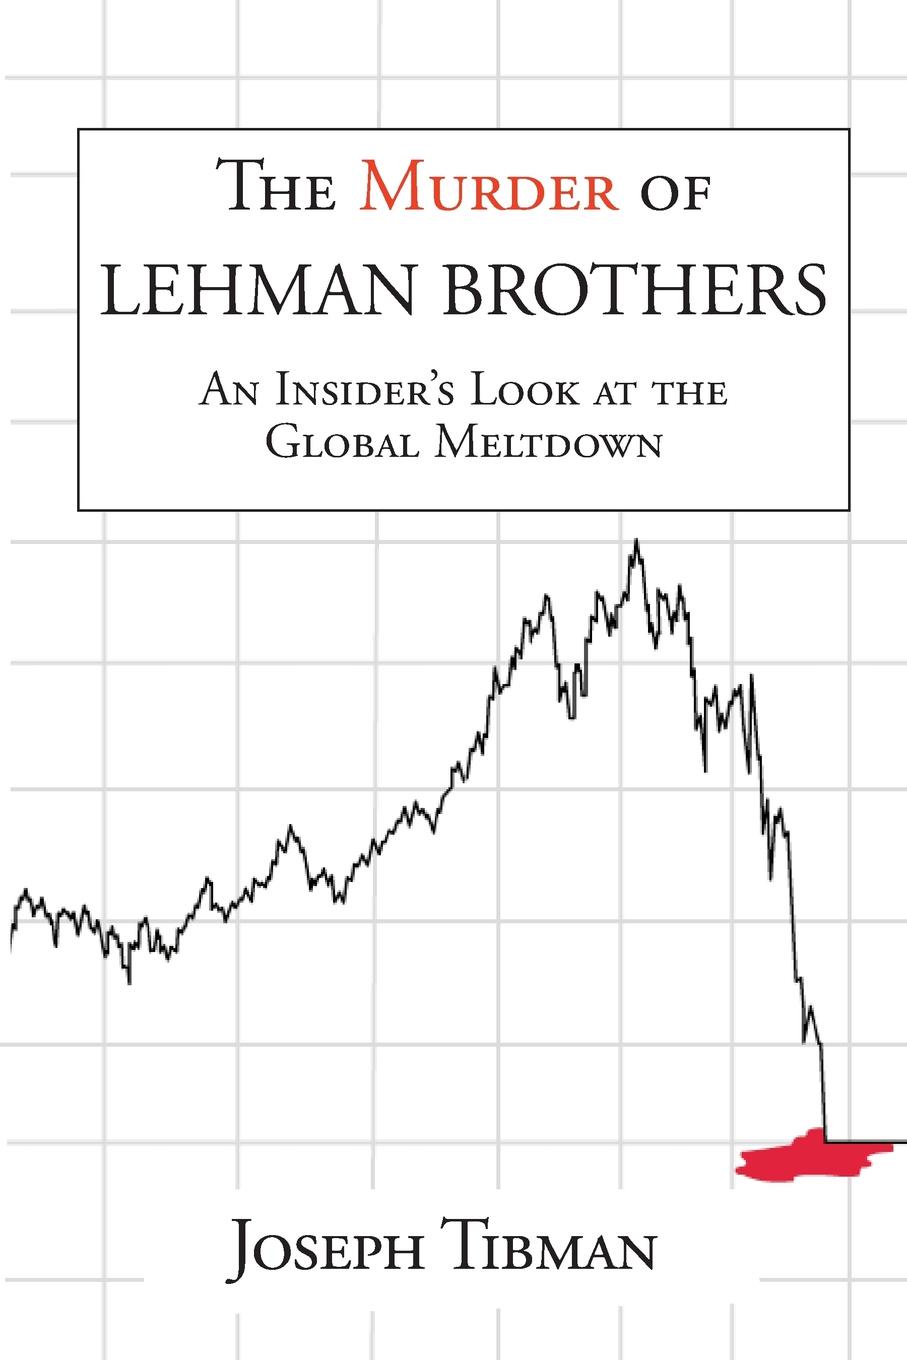 The Murder of Lehman Brothers, an Insider.s Look at the Global Meltdown